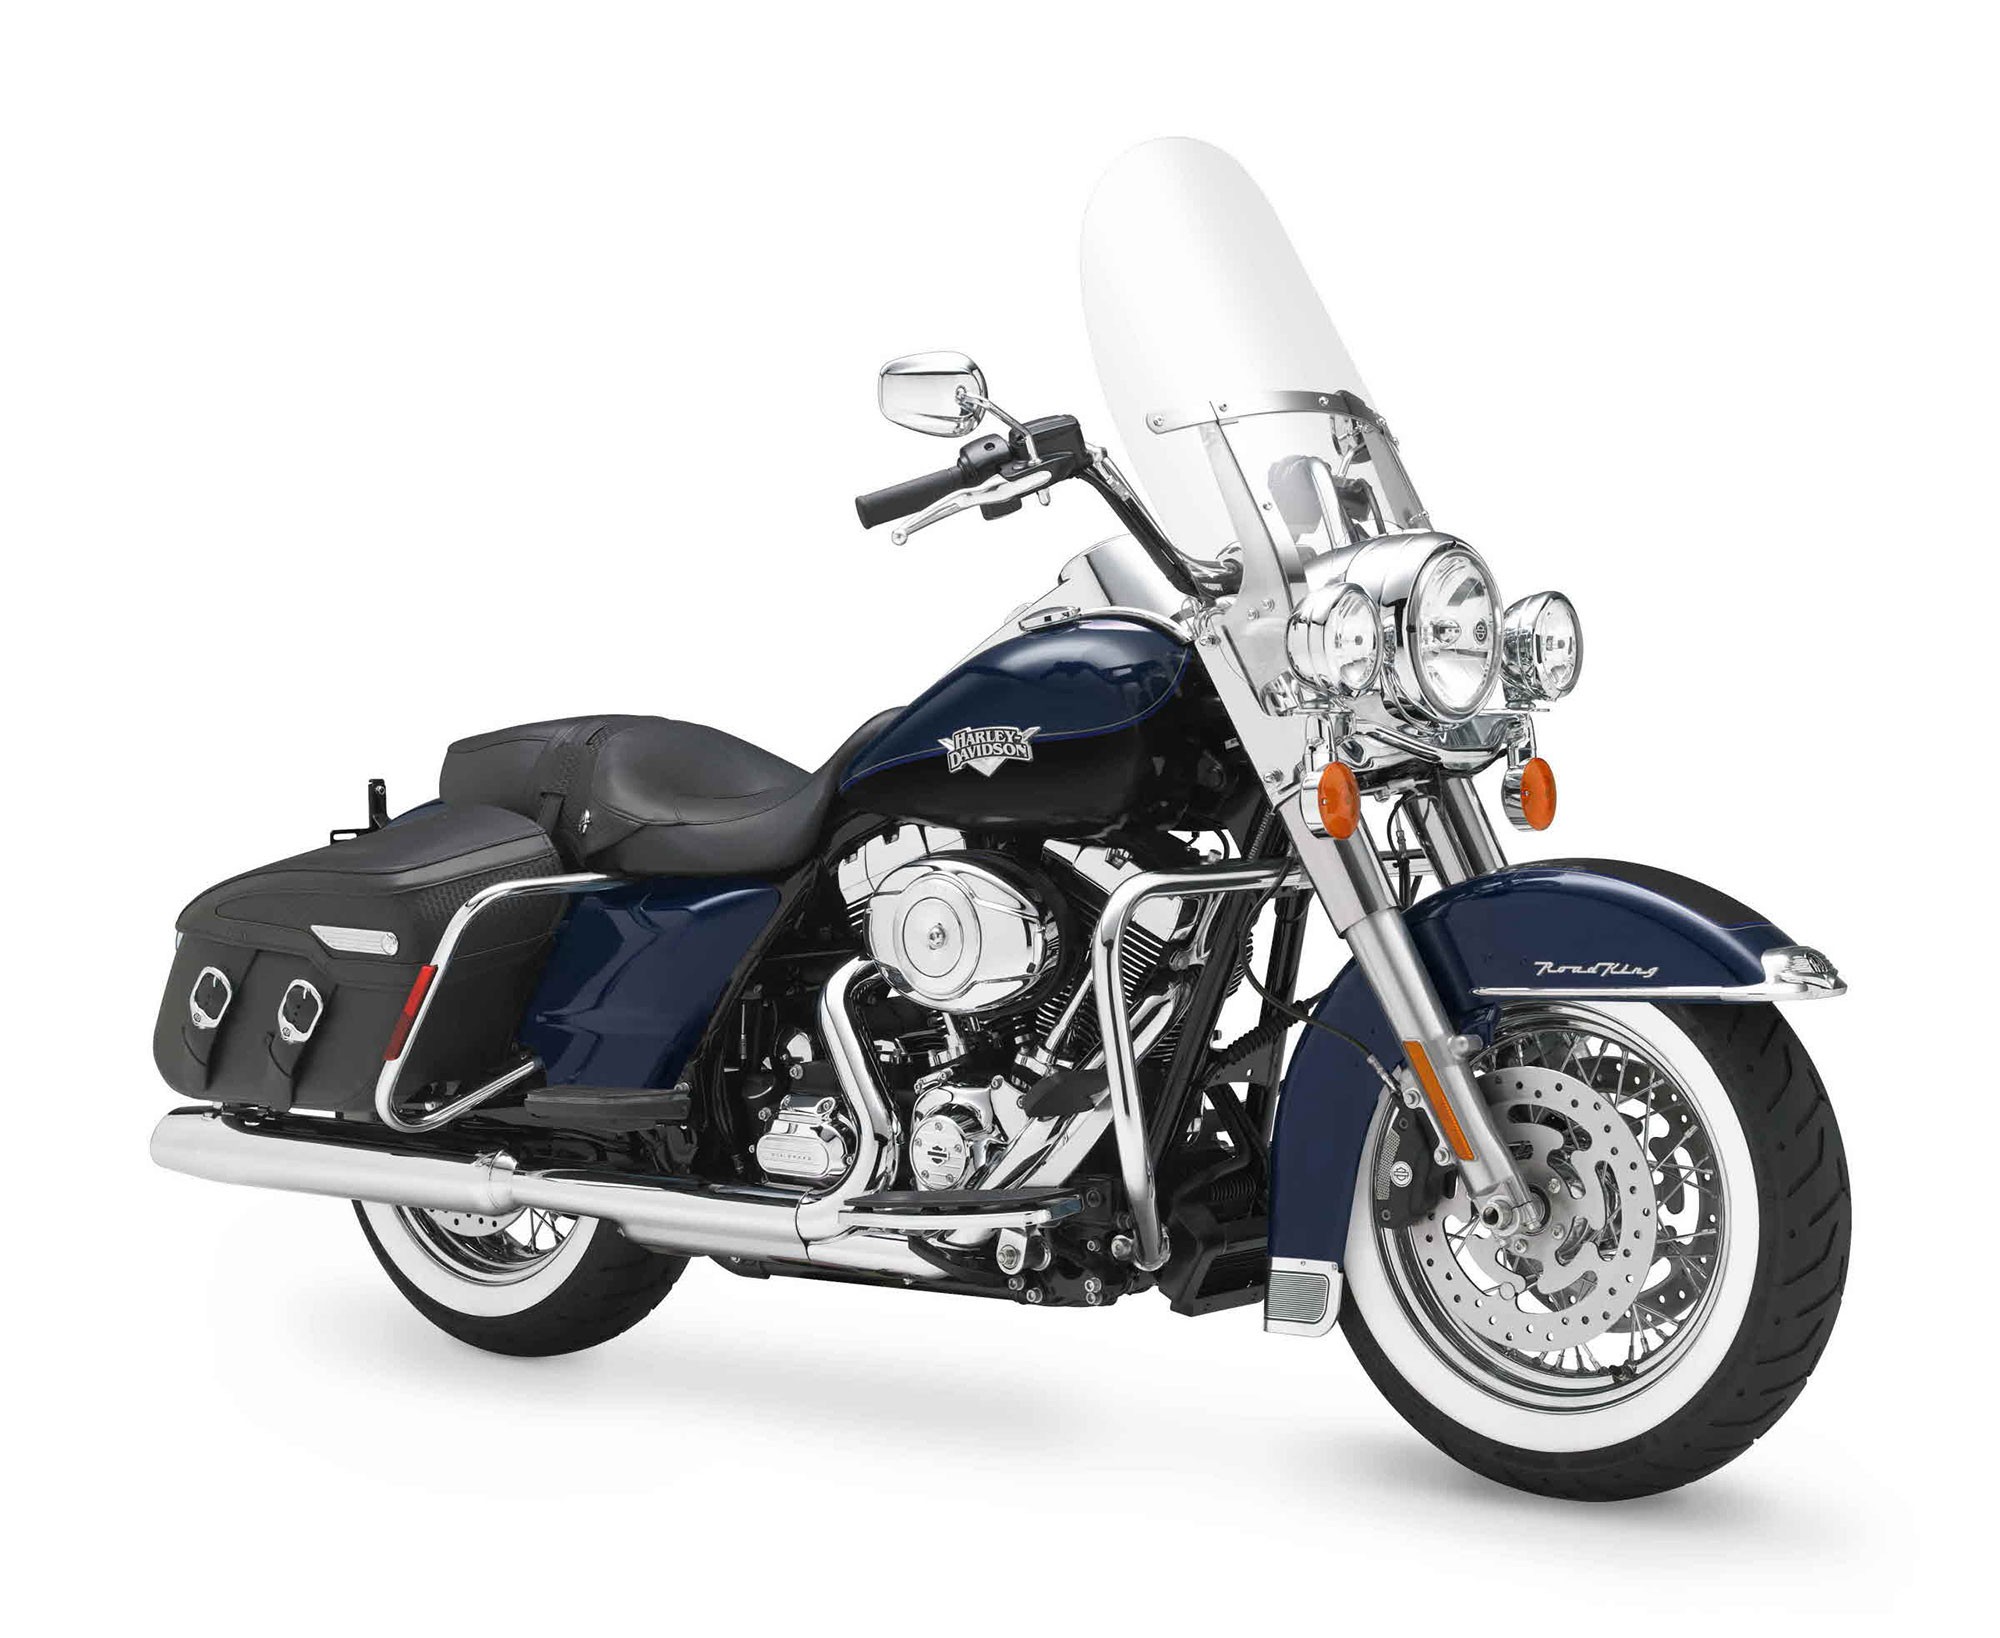 General 2000x1638 Harley-Davidson motorcycle vehicle Blue Motorcycles white background simple background American motorcycles